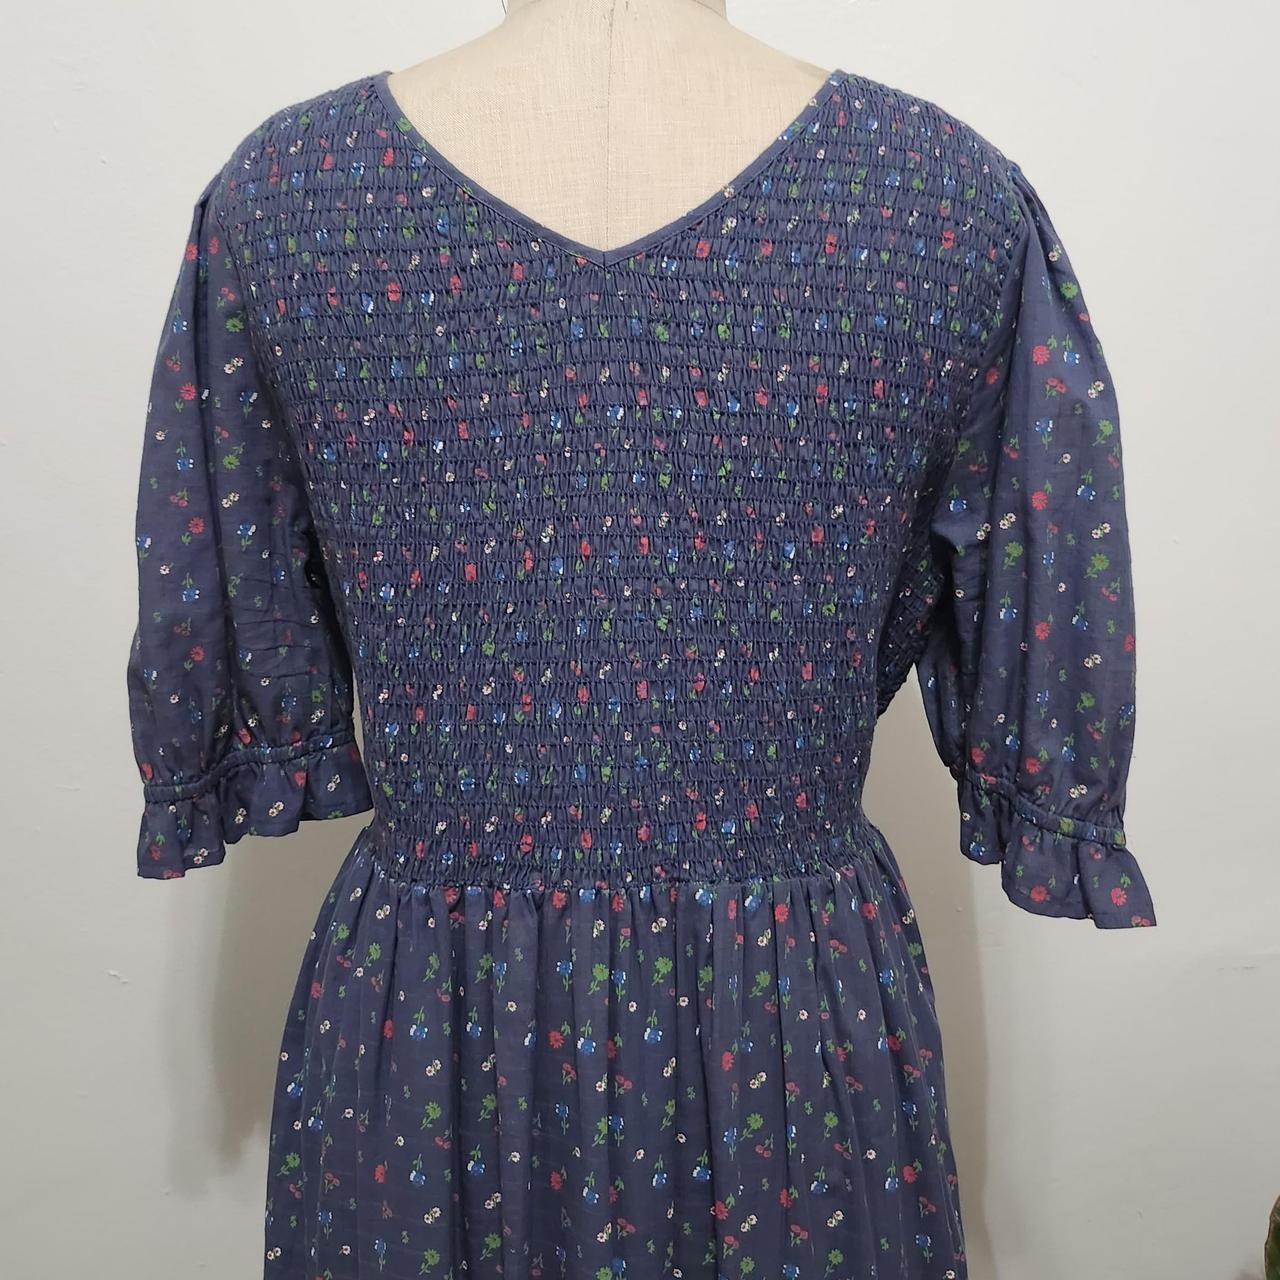 Product Image 4 - CHRISTY DAWN EXTENDED BROOKLYN DRESS

Perfect